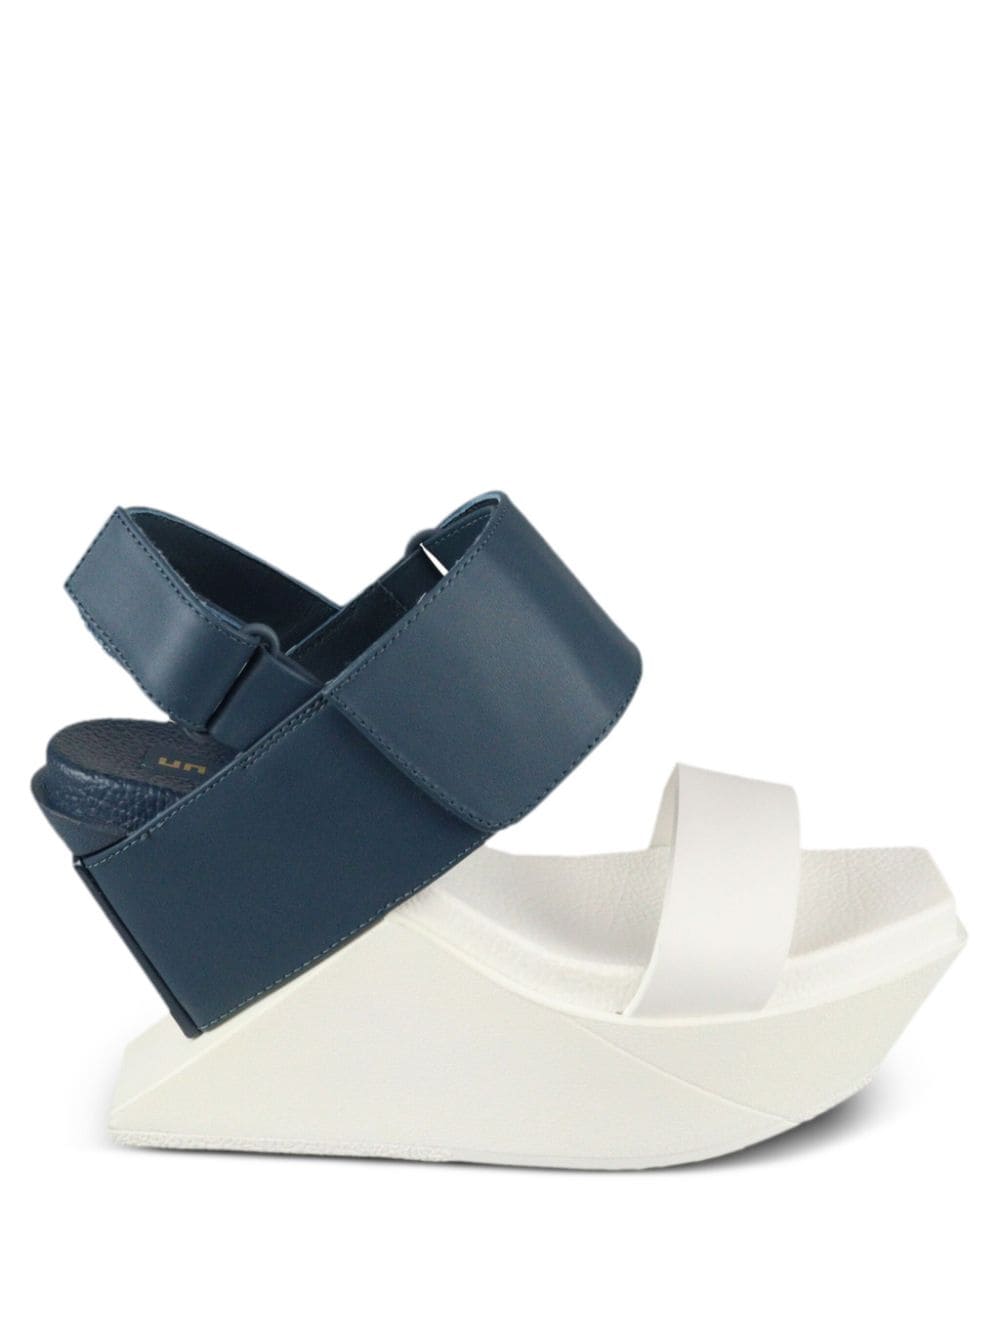 Delta Wedge leather sandals